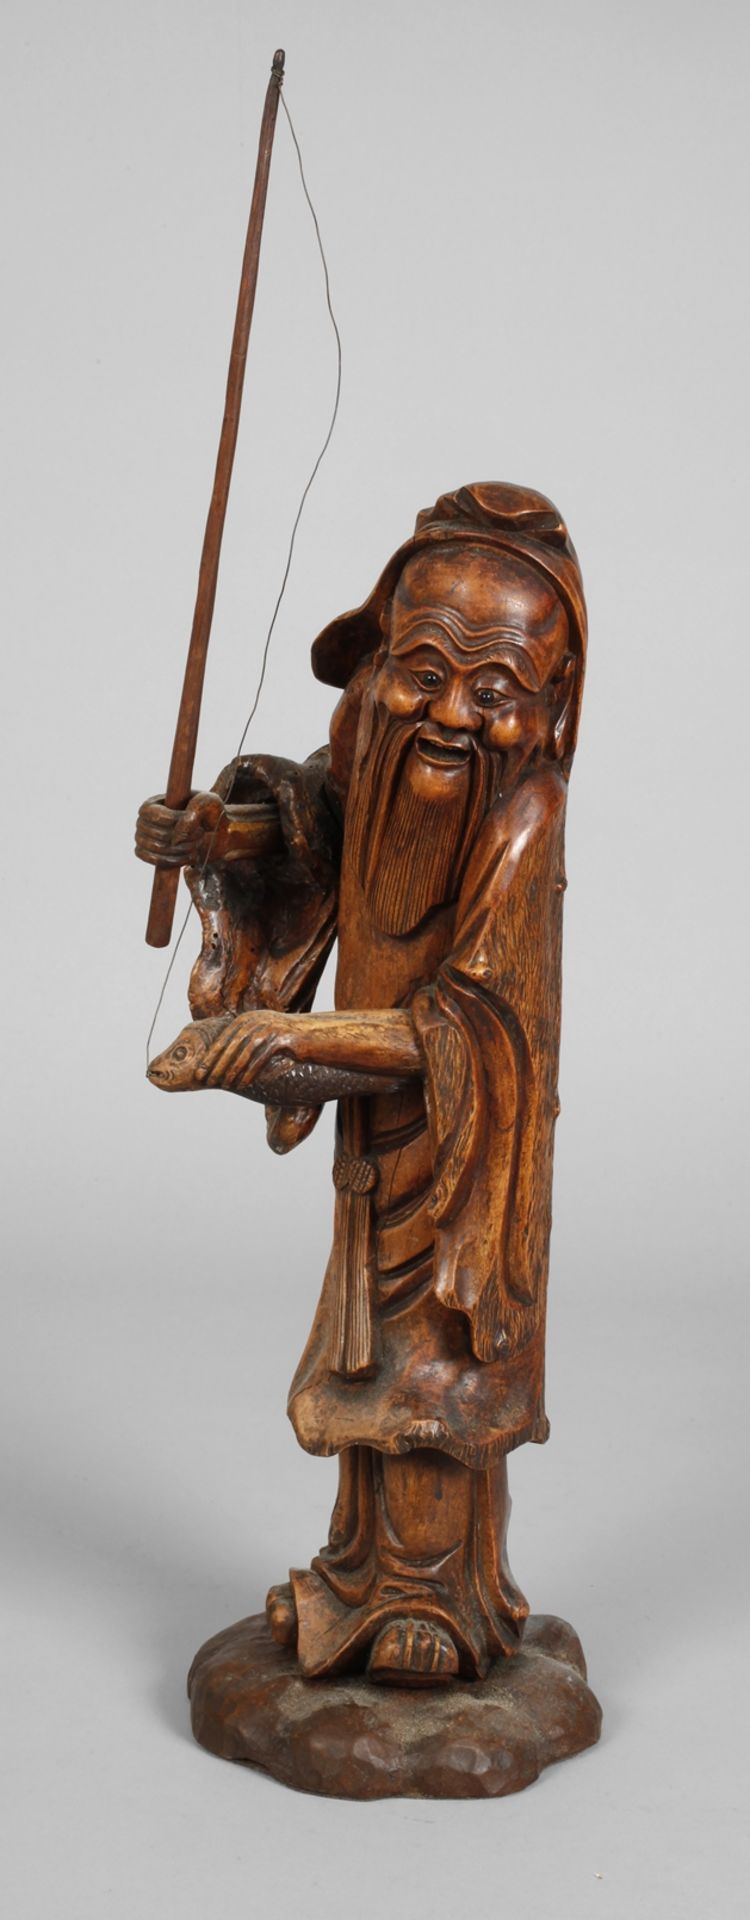 Figural carving